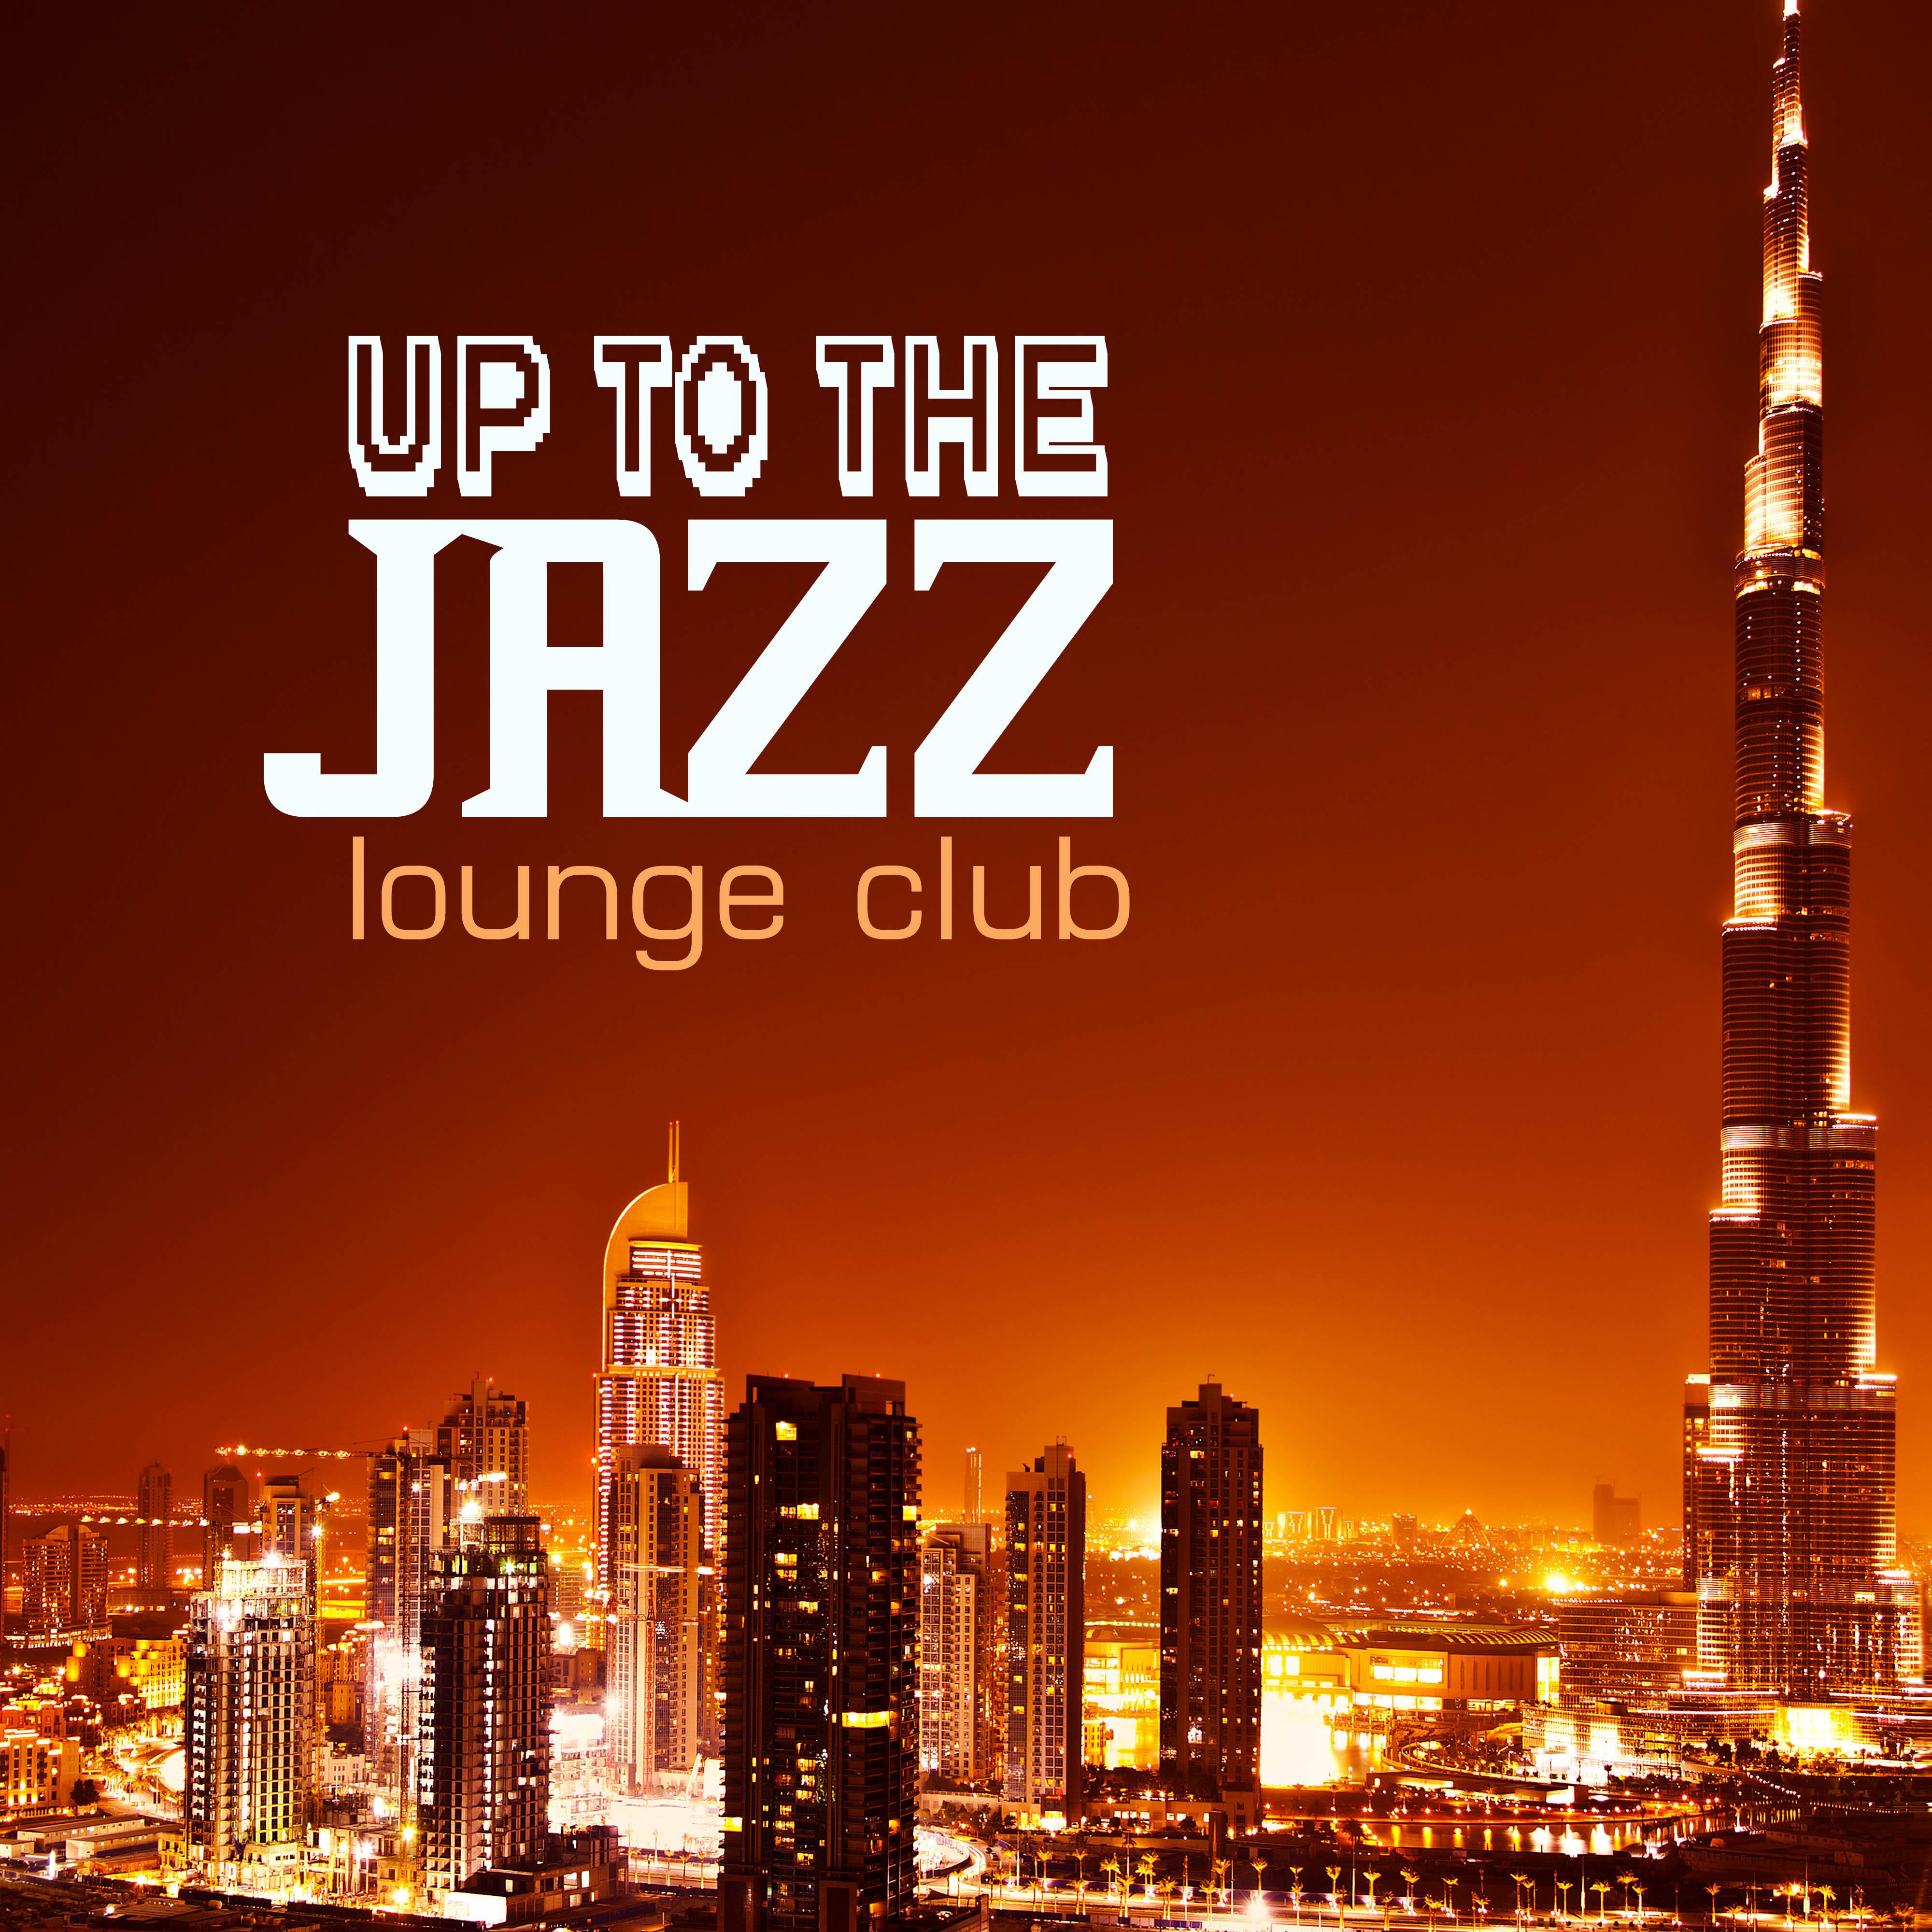 Up to The Jazz Lounge Club